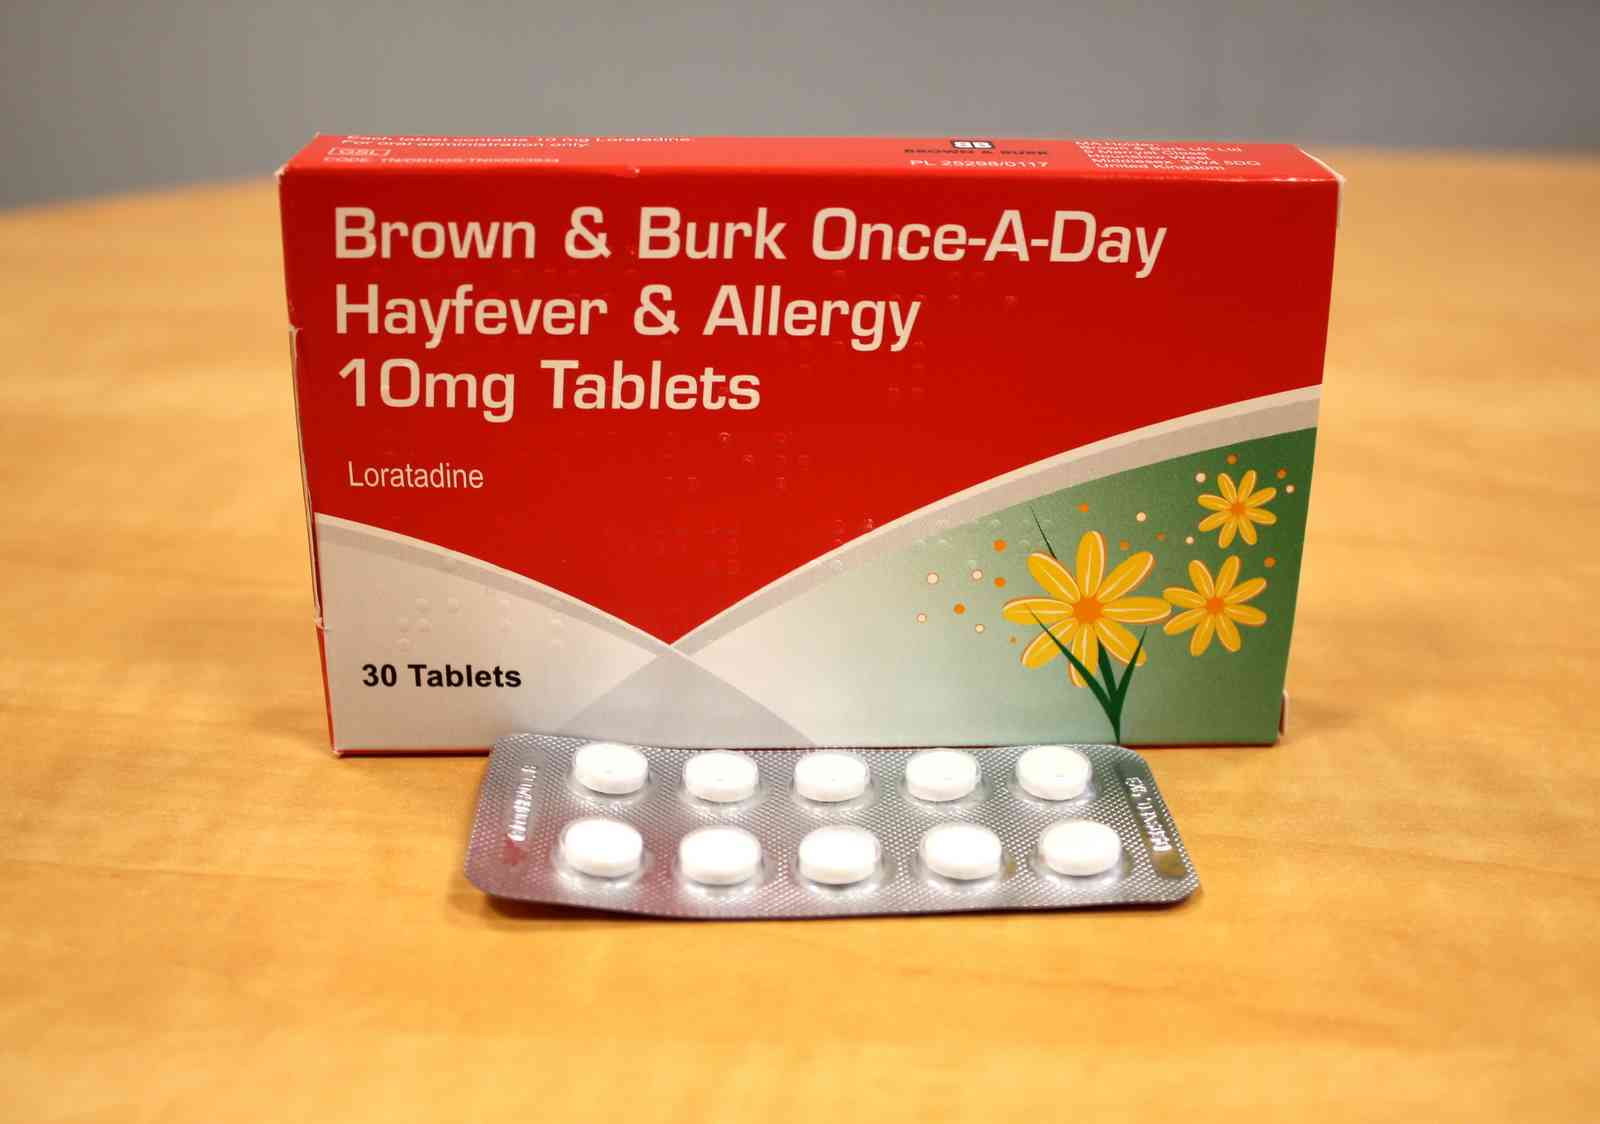 Brown & Burk - Once -A-Day Hayfever & Allergy 10 mg Tablets 30 Tablets